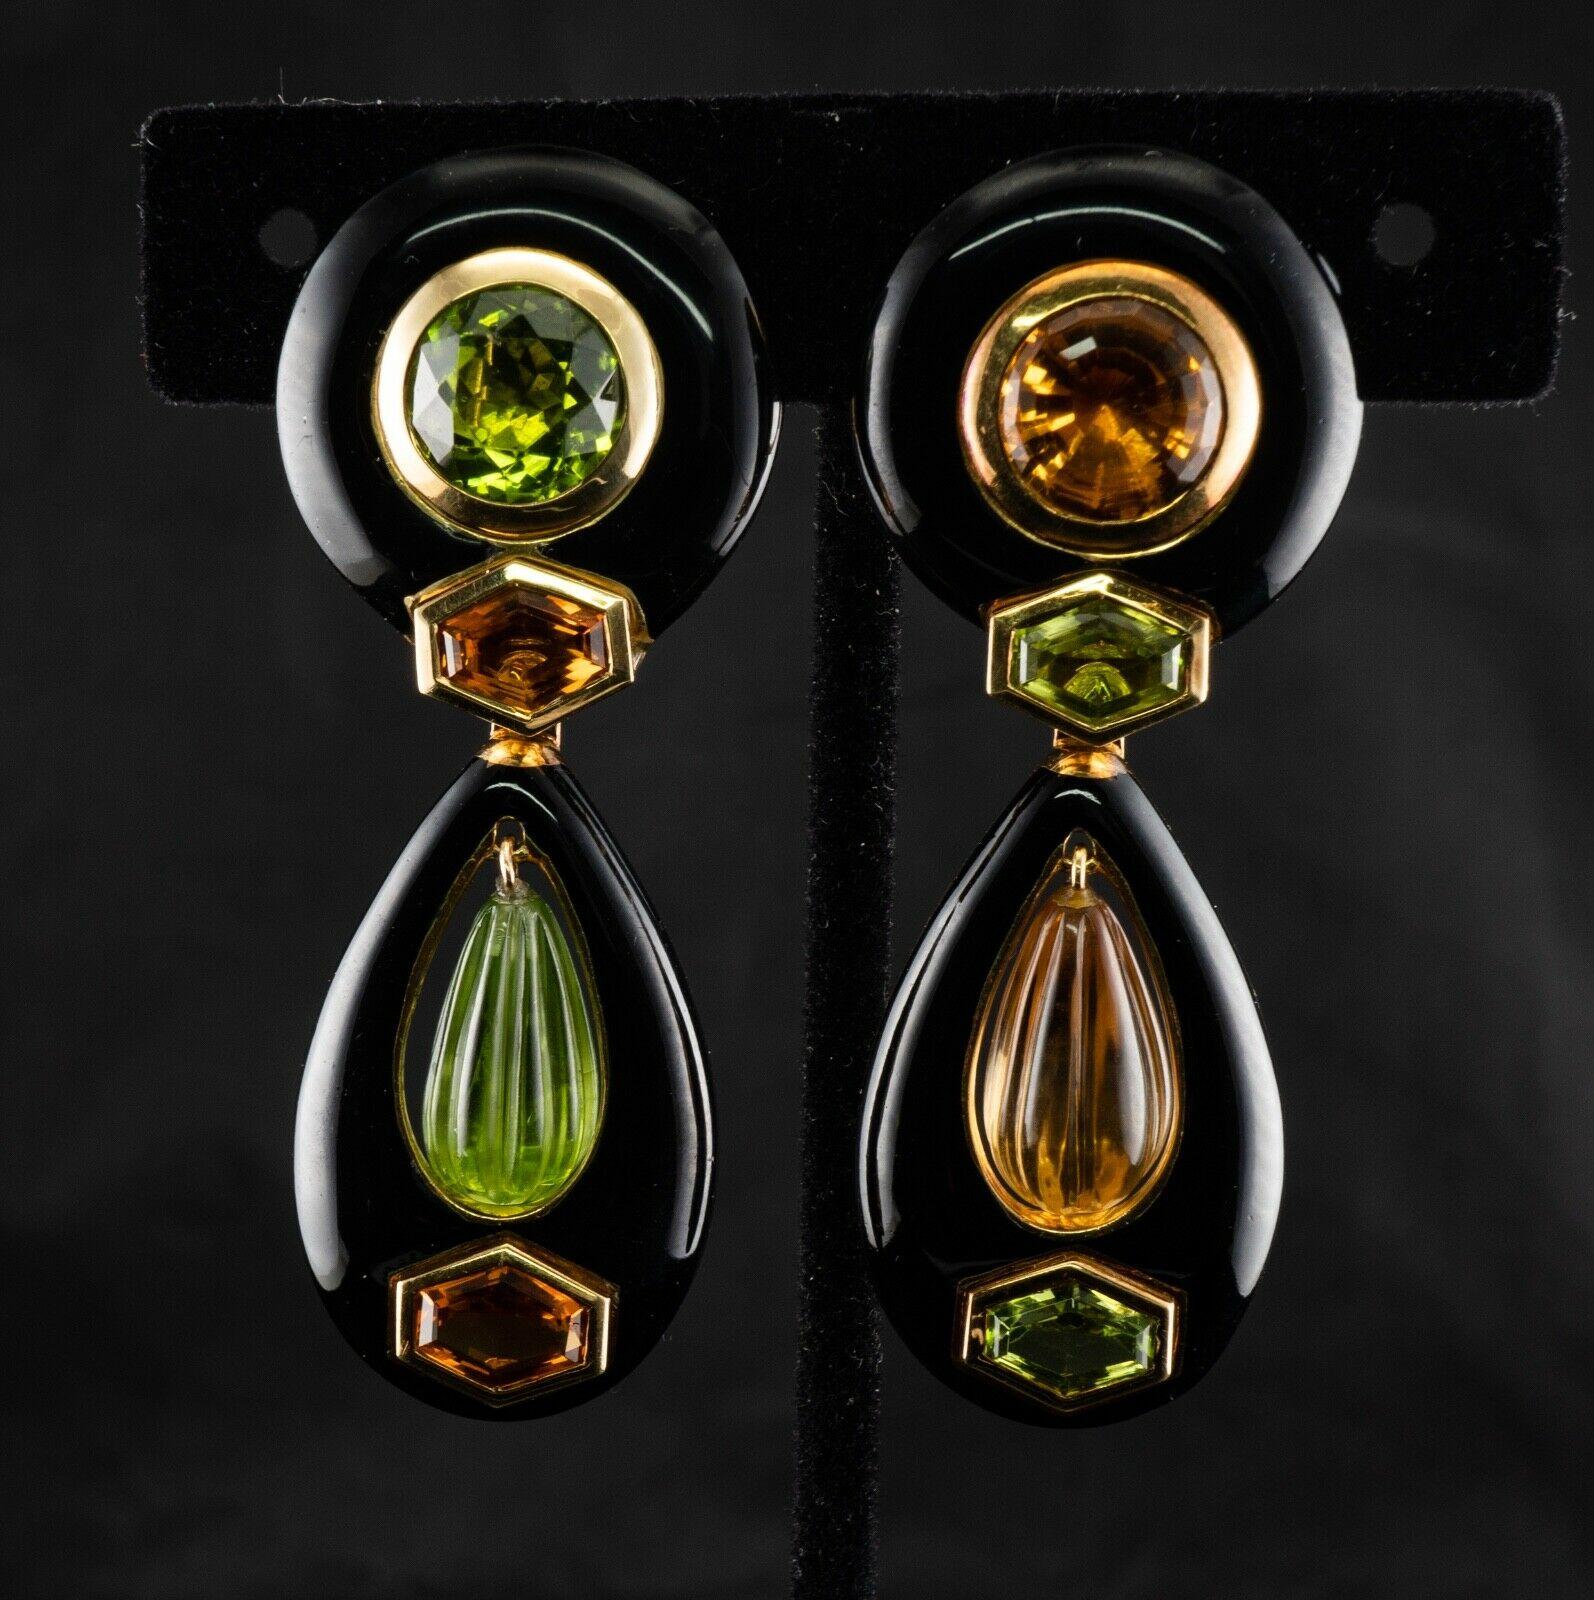 This gorgeous pair of earrings is made by Italian designer jewelry House Sabbadini. The earrings are crafted in solid 18K Yellow gold with black Onyx, genuine Earth mined Peridots and Citrines. The multifaceted Citrine and Peridot on the top measure